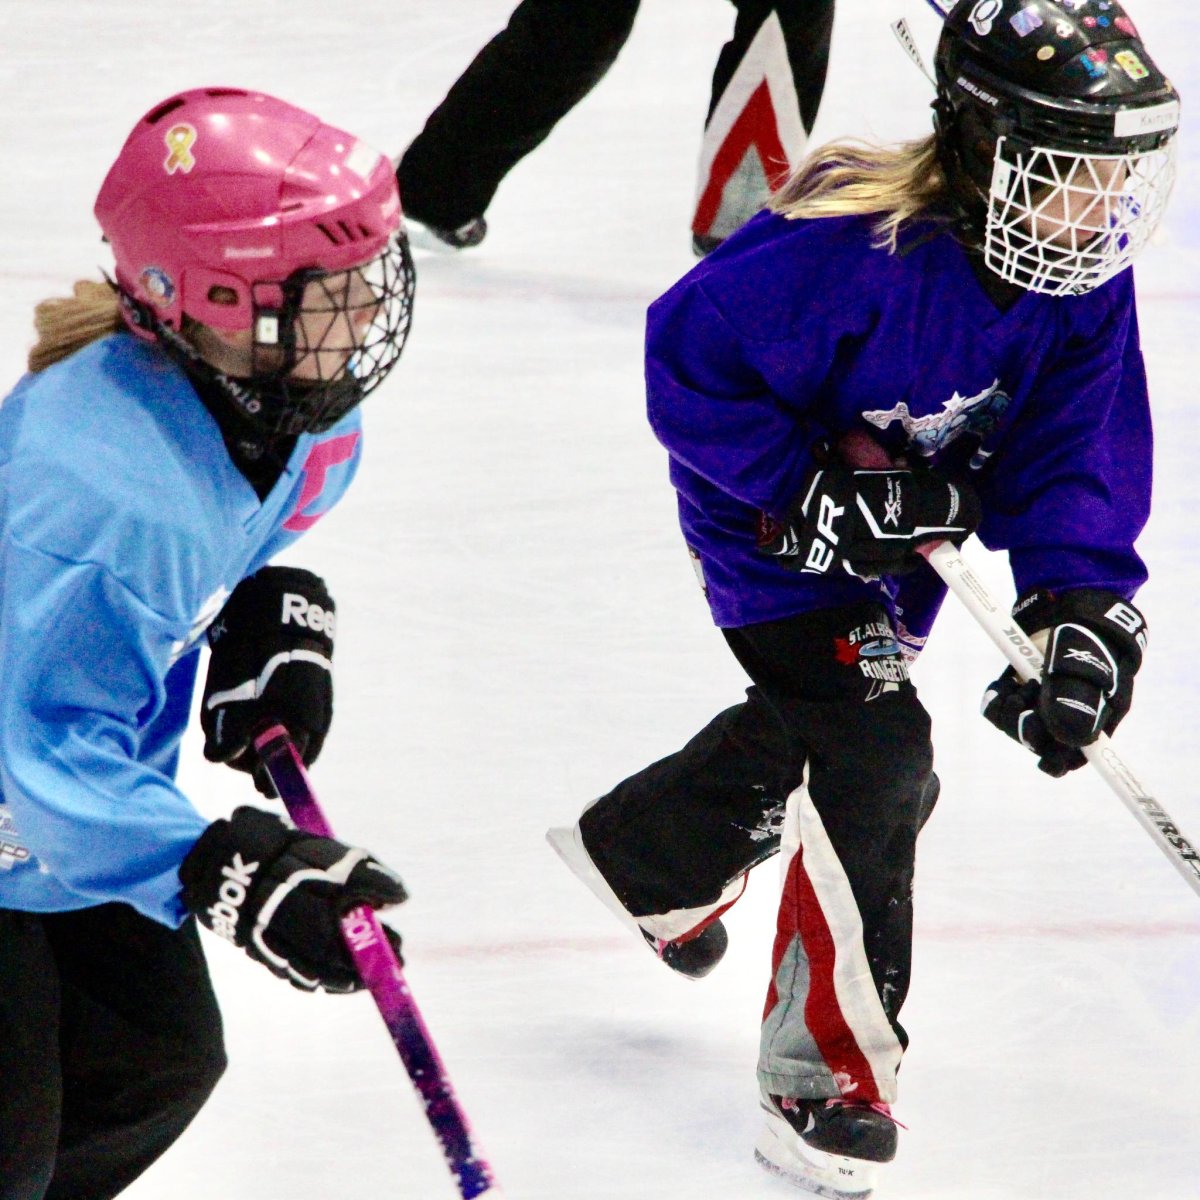 The ninth annual Ringette Scores on Cancer event takes place at West Edmonton Mall, Saturday, Jan. 13, 2018.  